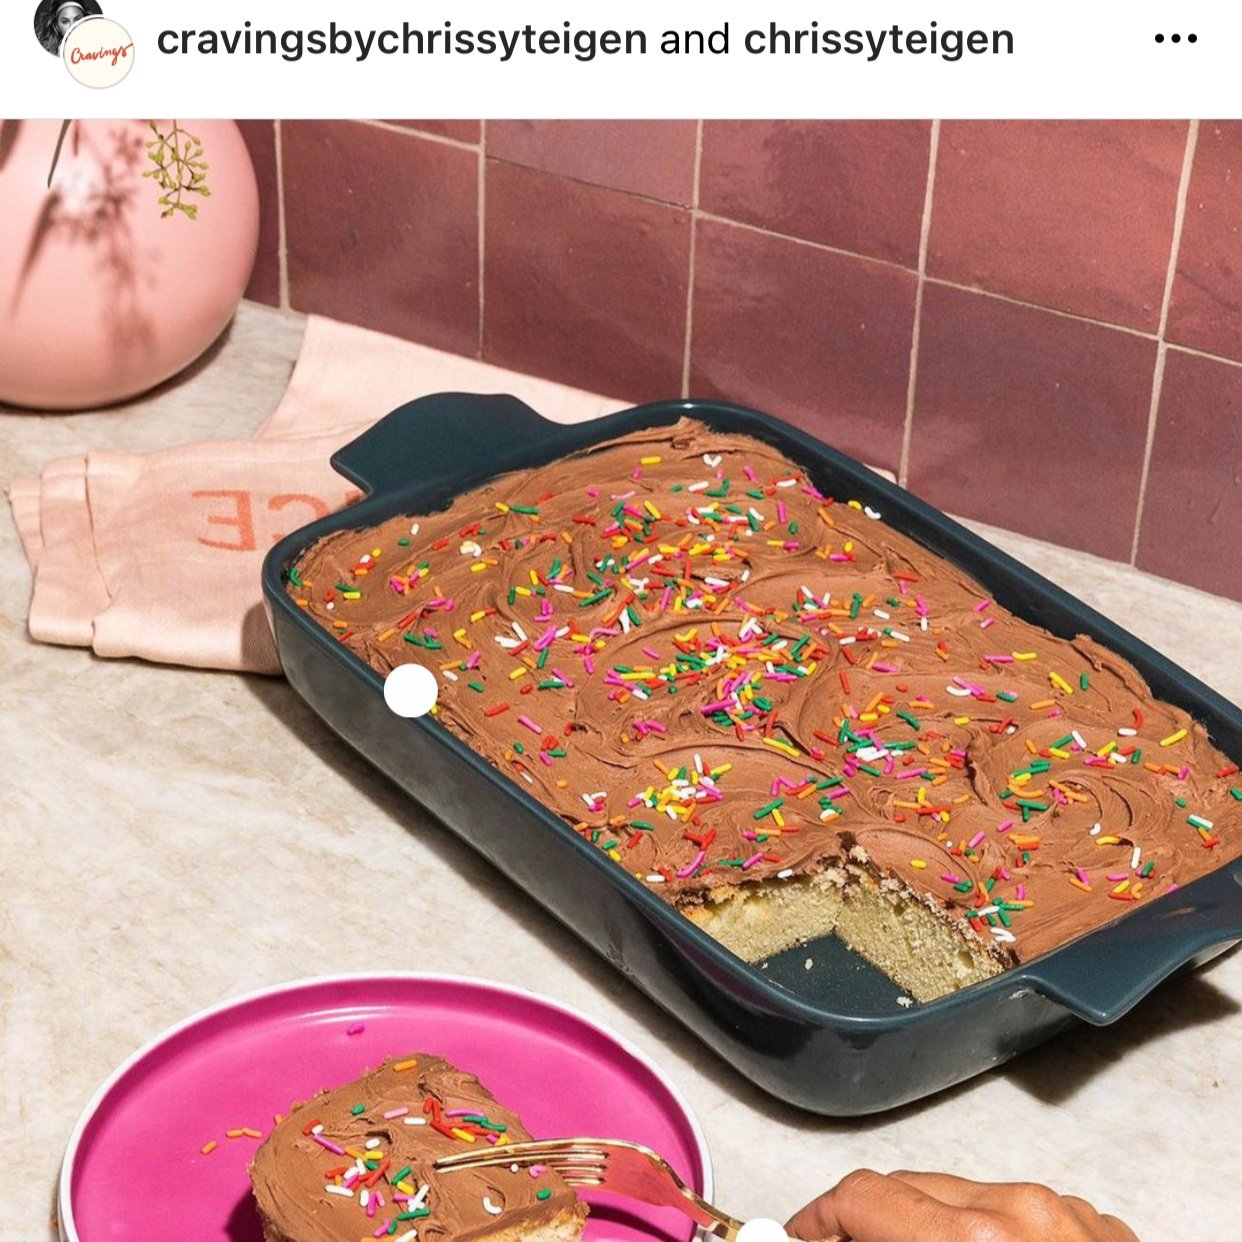 Chrissy's collab